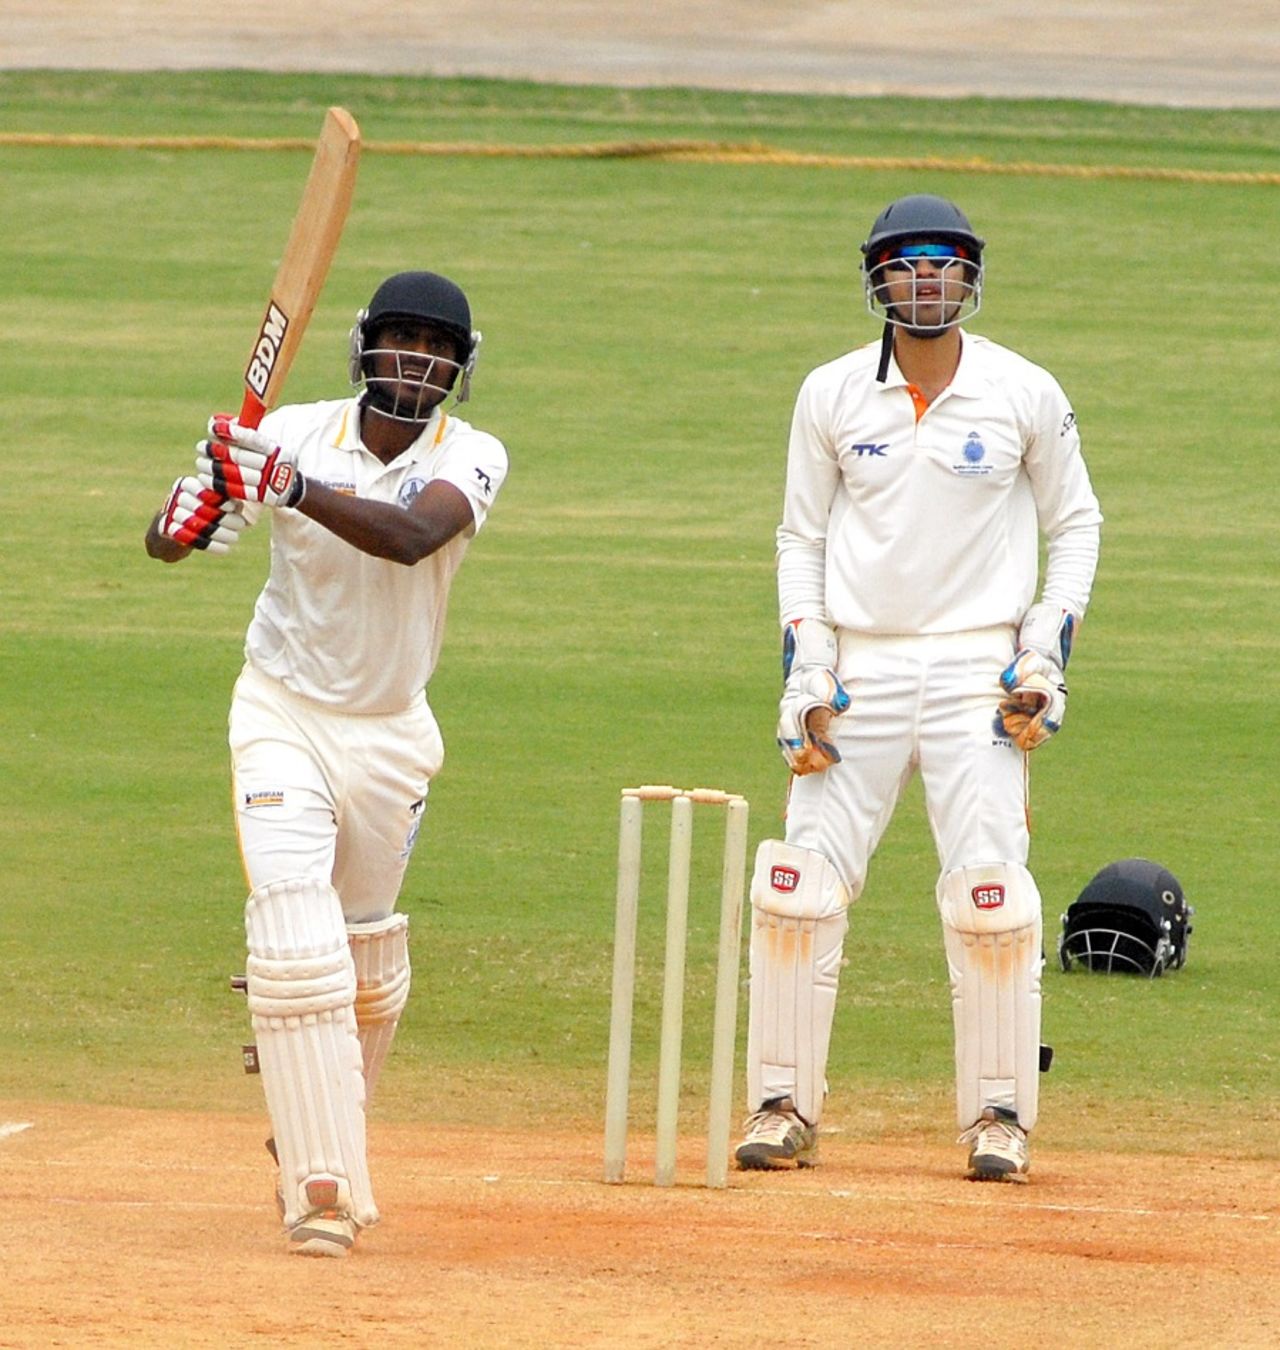 R Prasanna made 74 but could not prevent Tamil Nadu from being asked to follow-on, Ranji Trophy, Group A, Chennai, 3rd day, December 23, 2014